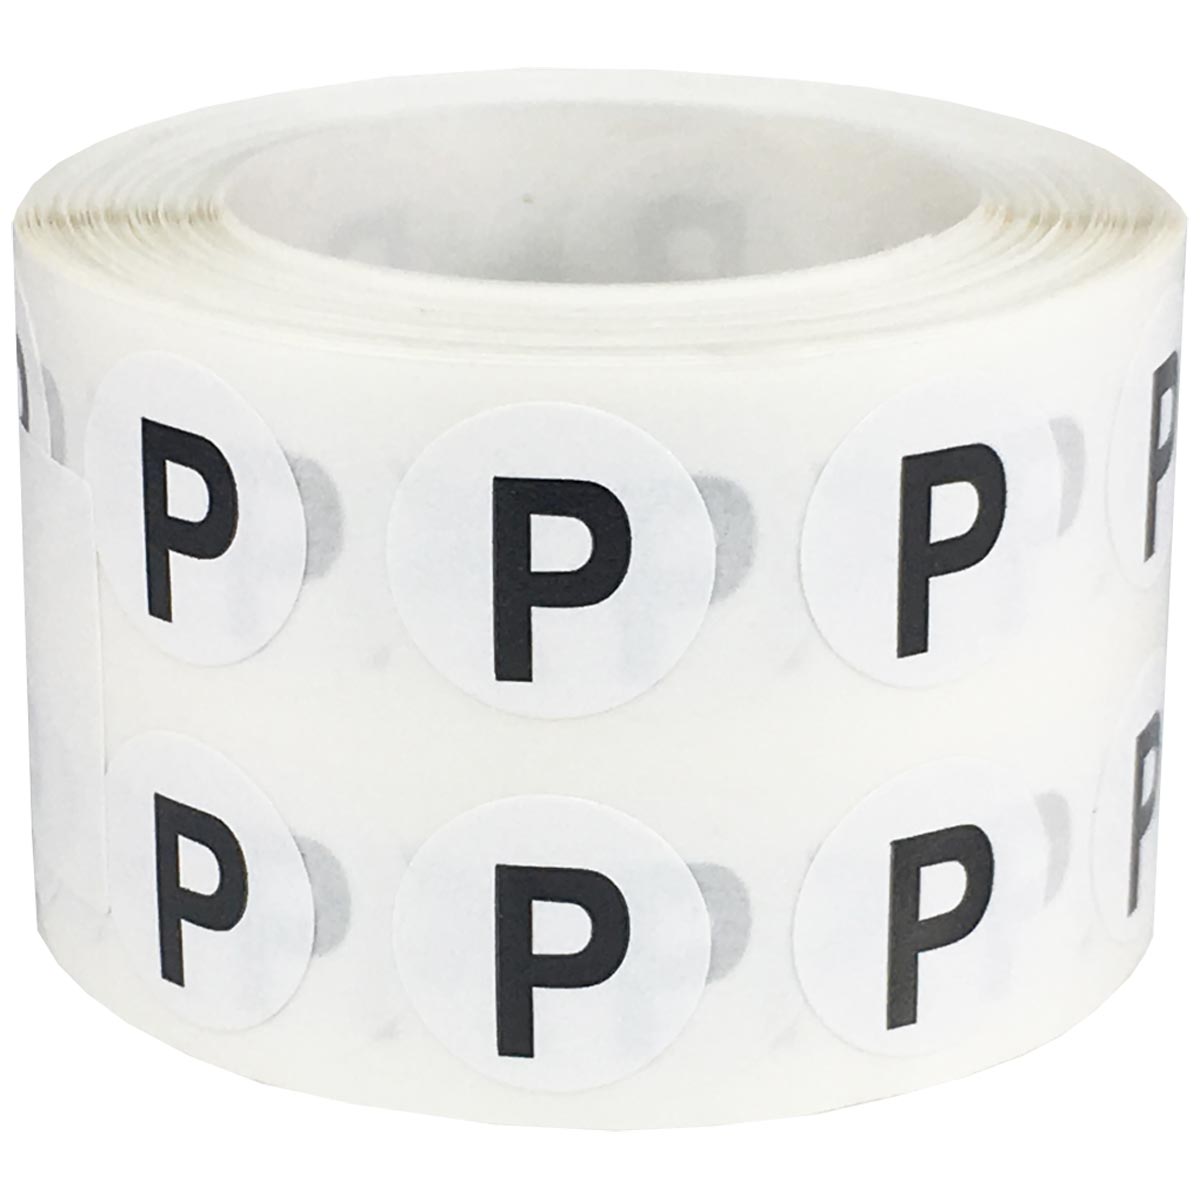 Small Letter P Stickers 1/2 Round